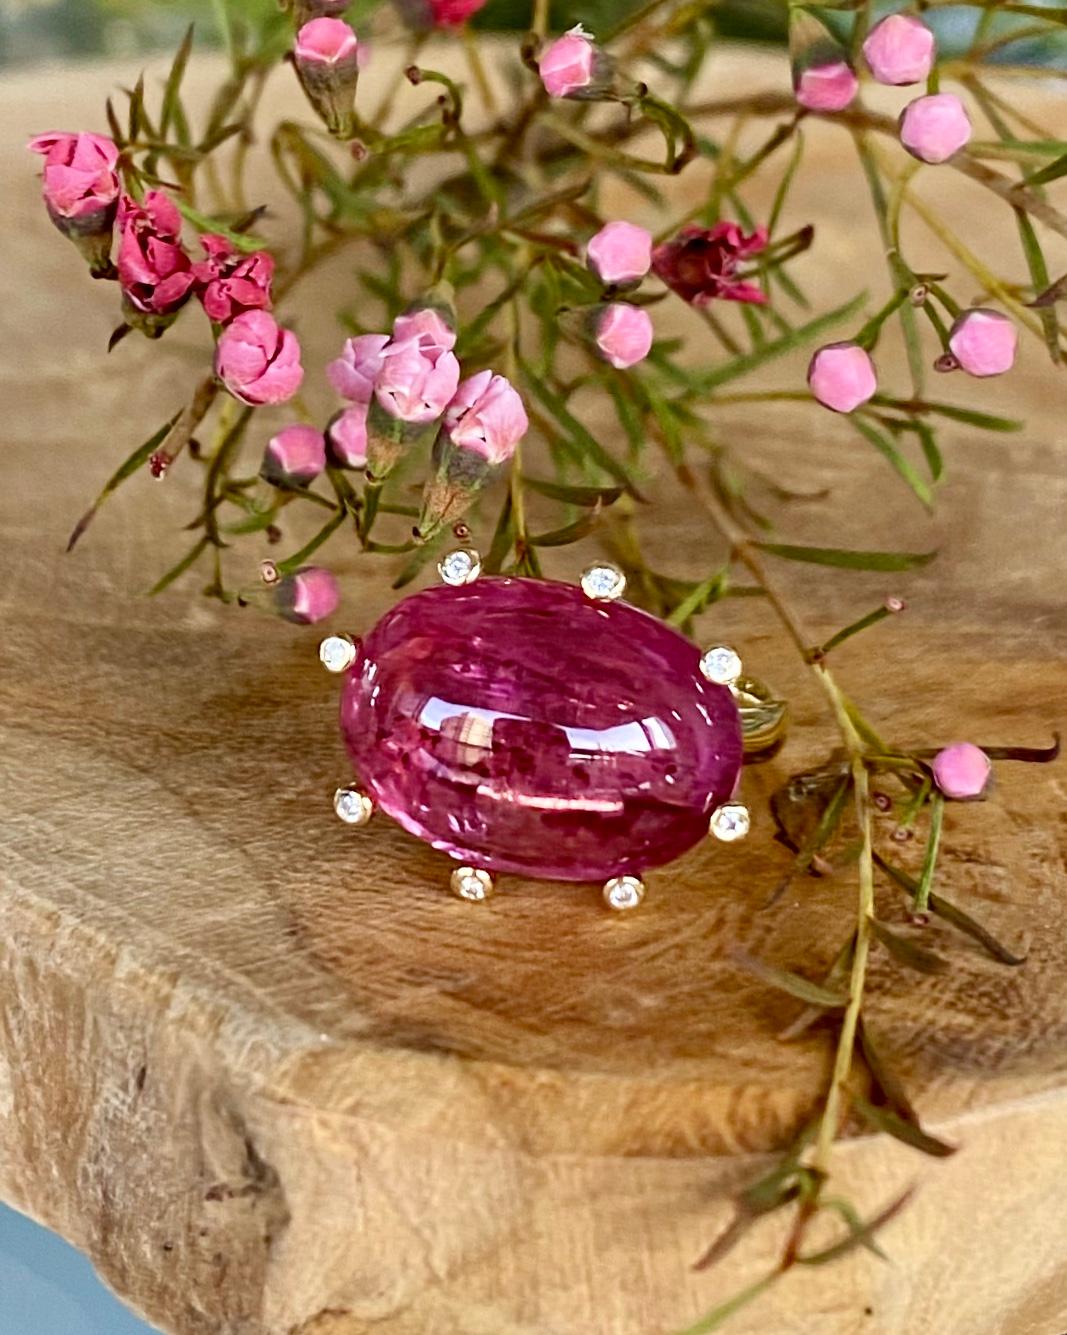 A rubellite tourmaline and diamond solitaire cocktail ring, handcrafted in 18 karat yellow gold.

This beautiful rubellite cabochon gemstone only needs diamond accents to highlight the natural luminous and translucent beauty of the gem. Simply